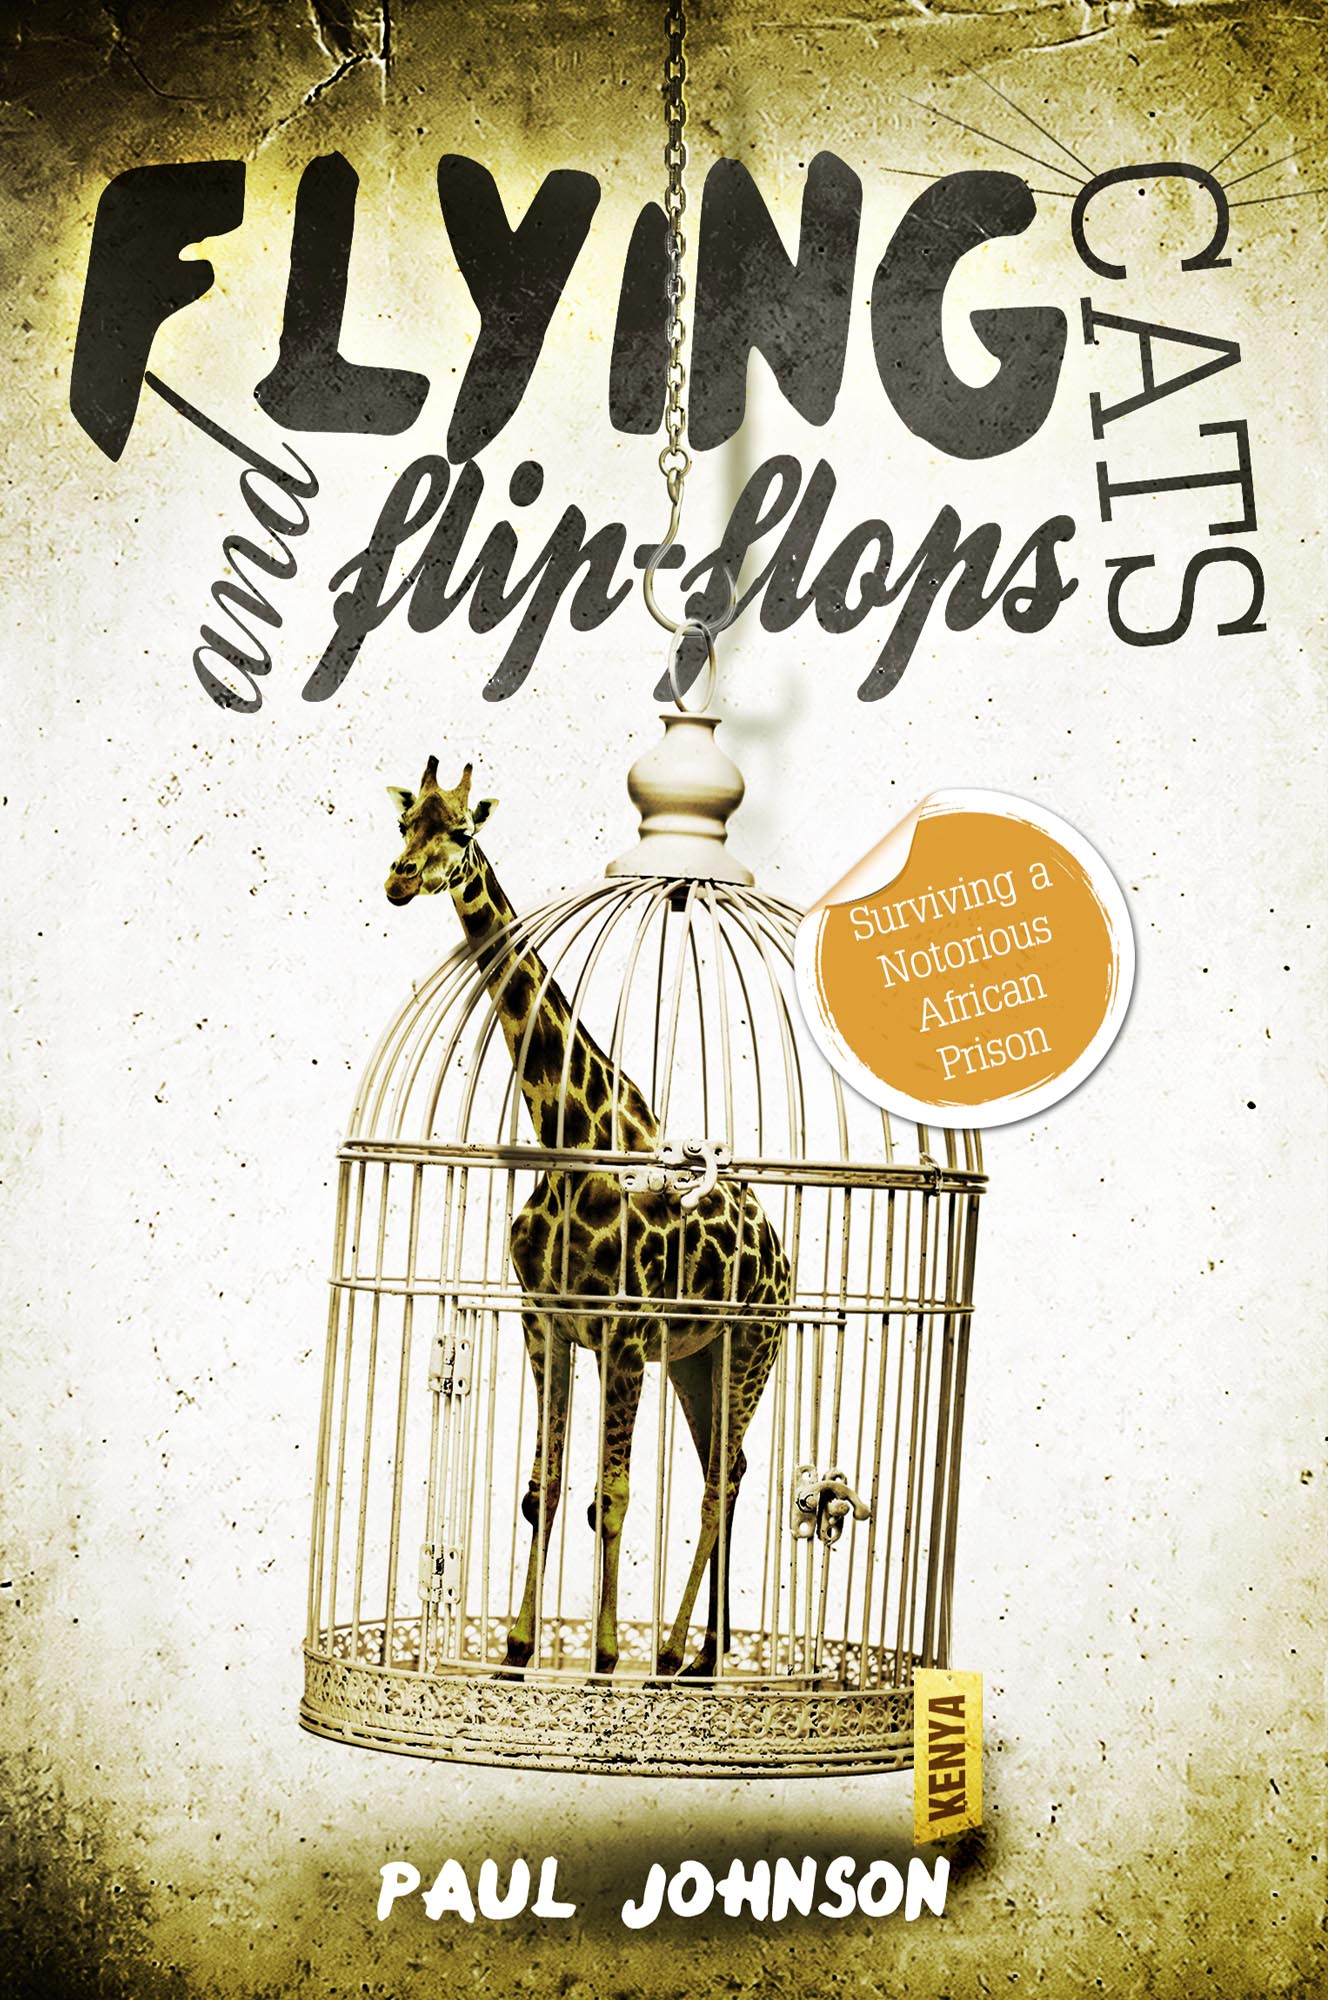 FREE: Flying Cats & Flip Flops. Surviving a Notorious African Prison by Paul Johnson